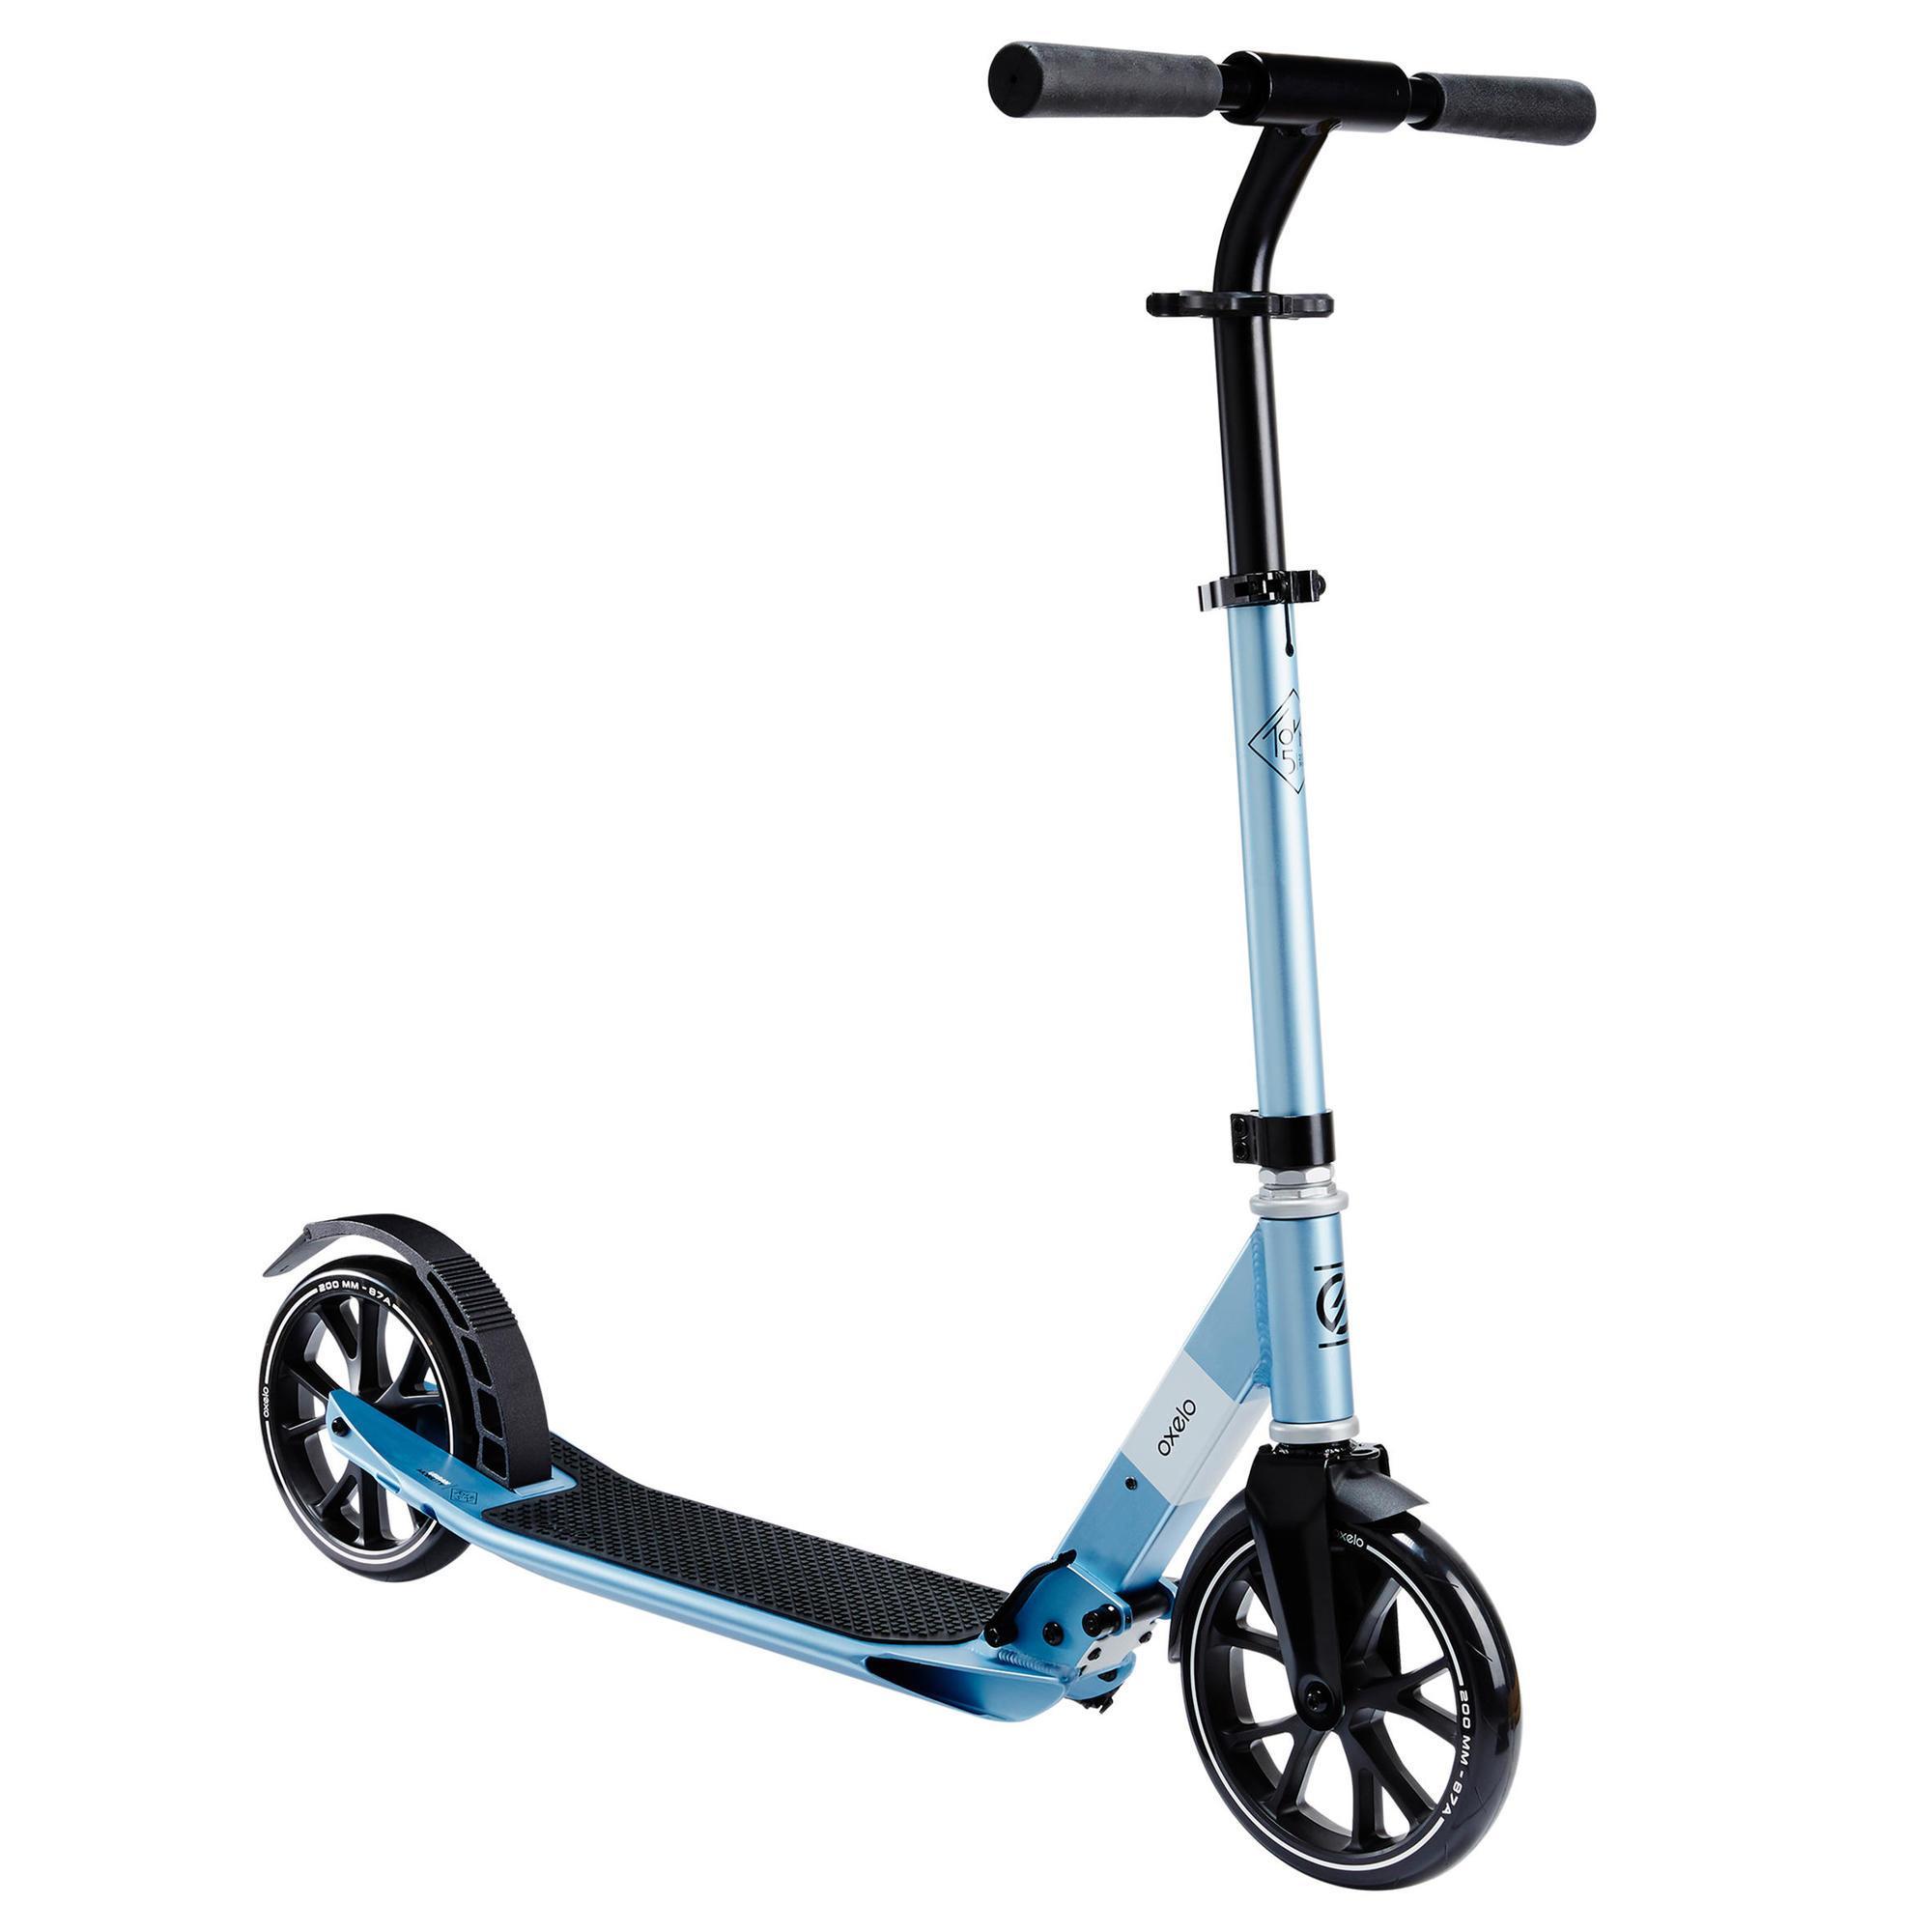 Town 5 XL Adult Scooter - Decathlon